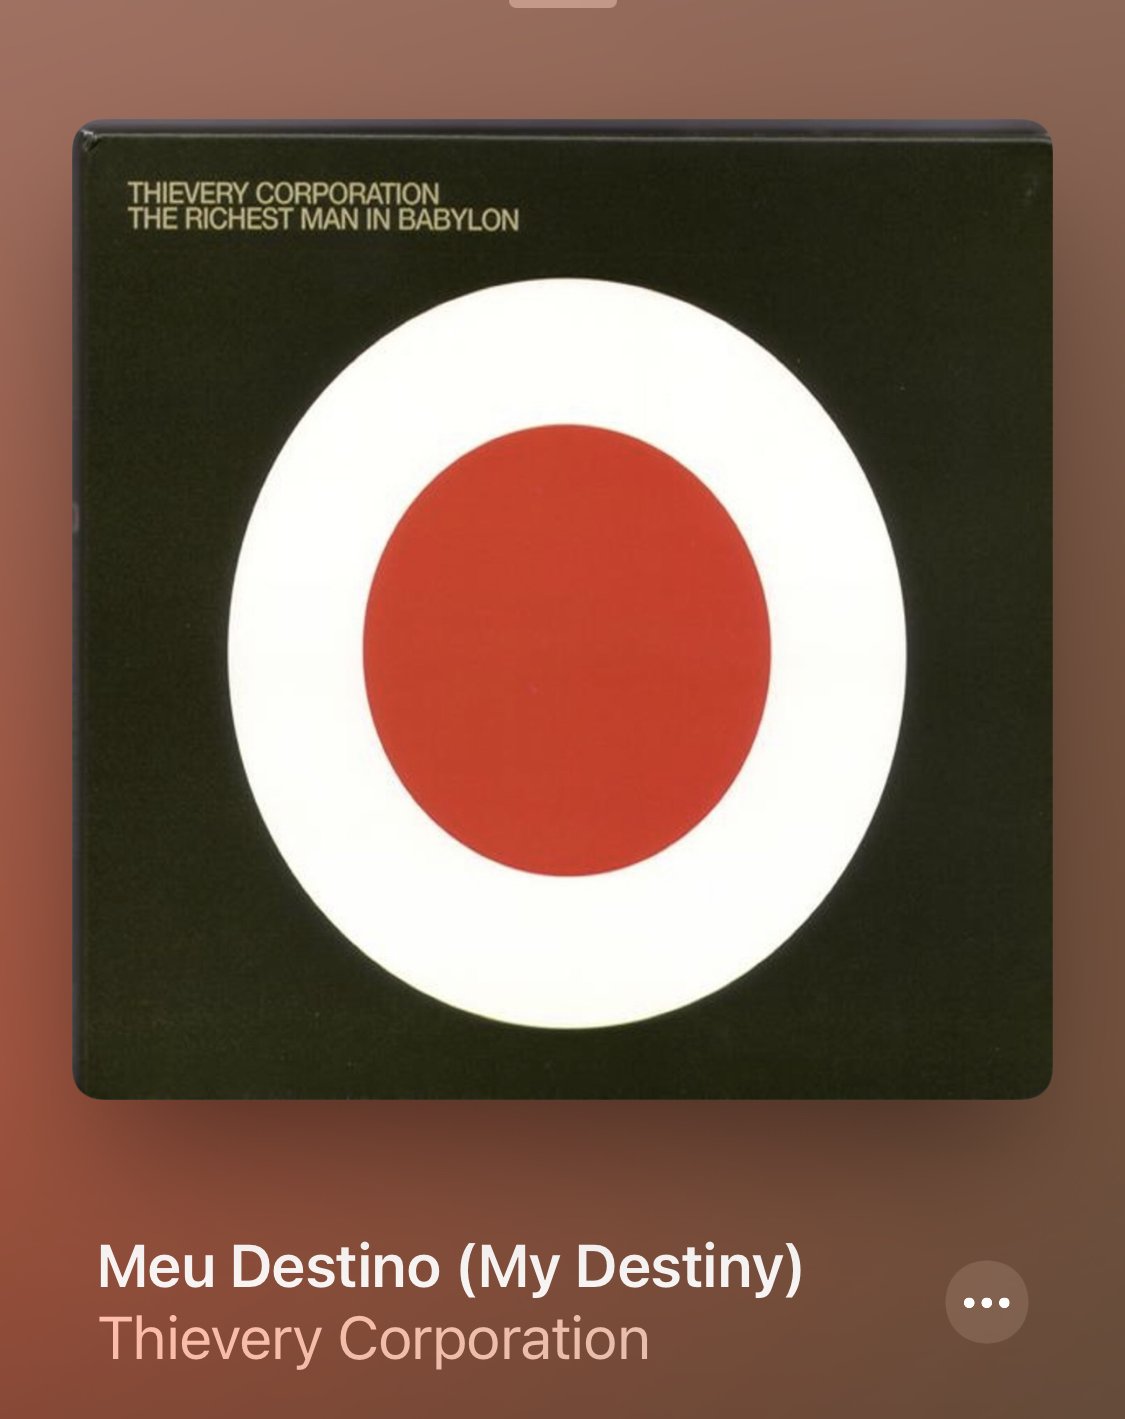  Thievery Corporation is one of my favorite musical groups of all time. Their work is some of the most instrumentally and lyrically rich music you could listen to, often incorporating lyrics in different languages. “Meu Destino” stands out to me as I